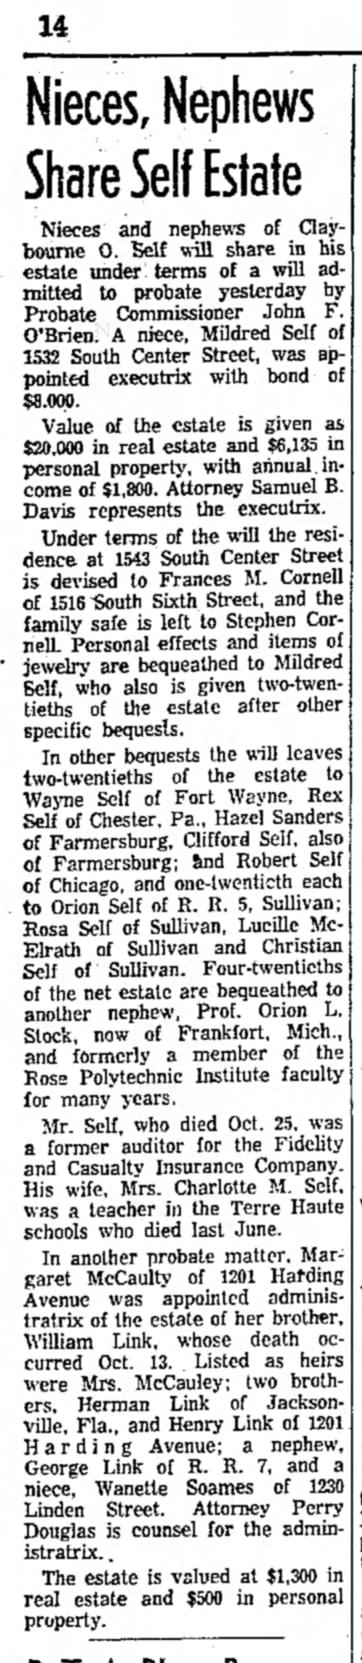 Nieces and Nephews share Self estate, Terre Haute Star, 30 October 1957, page 14 column1.